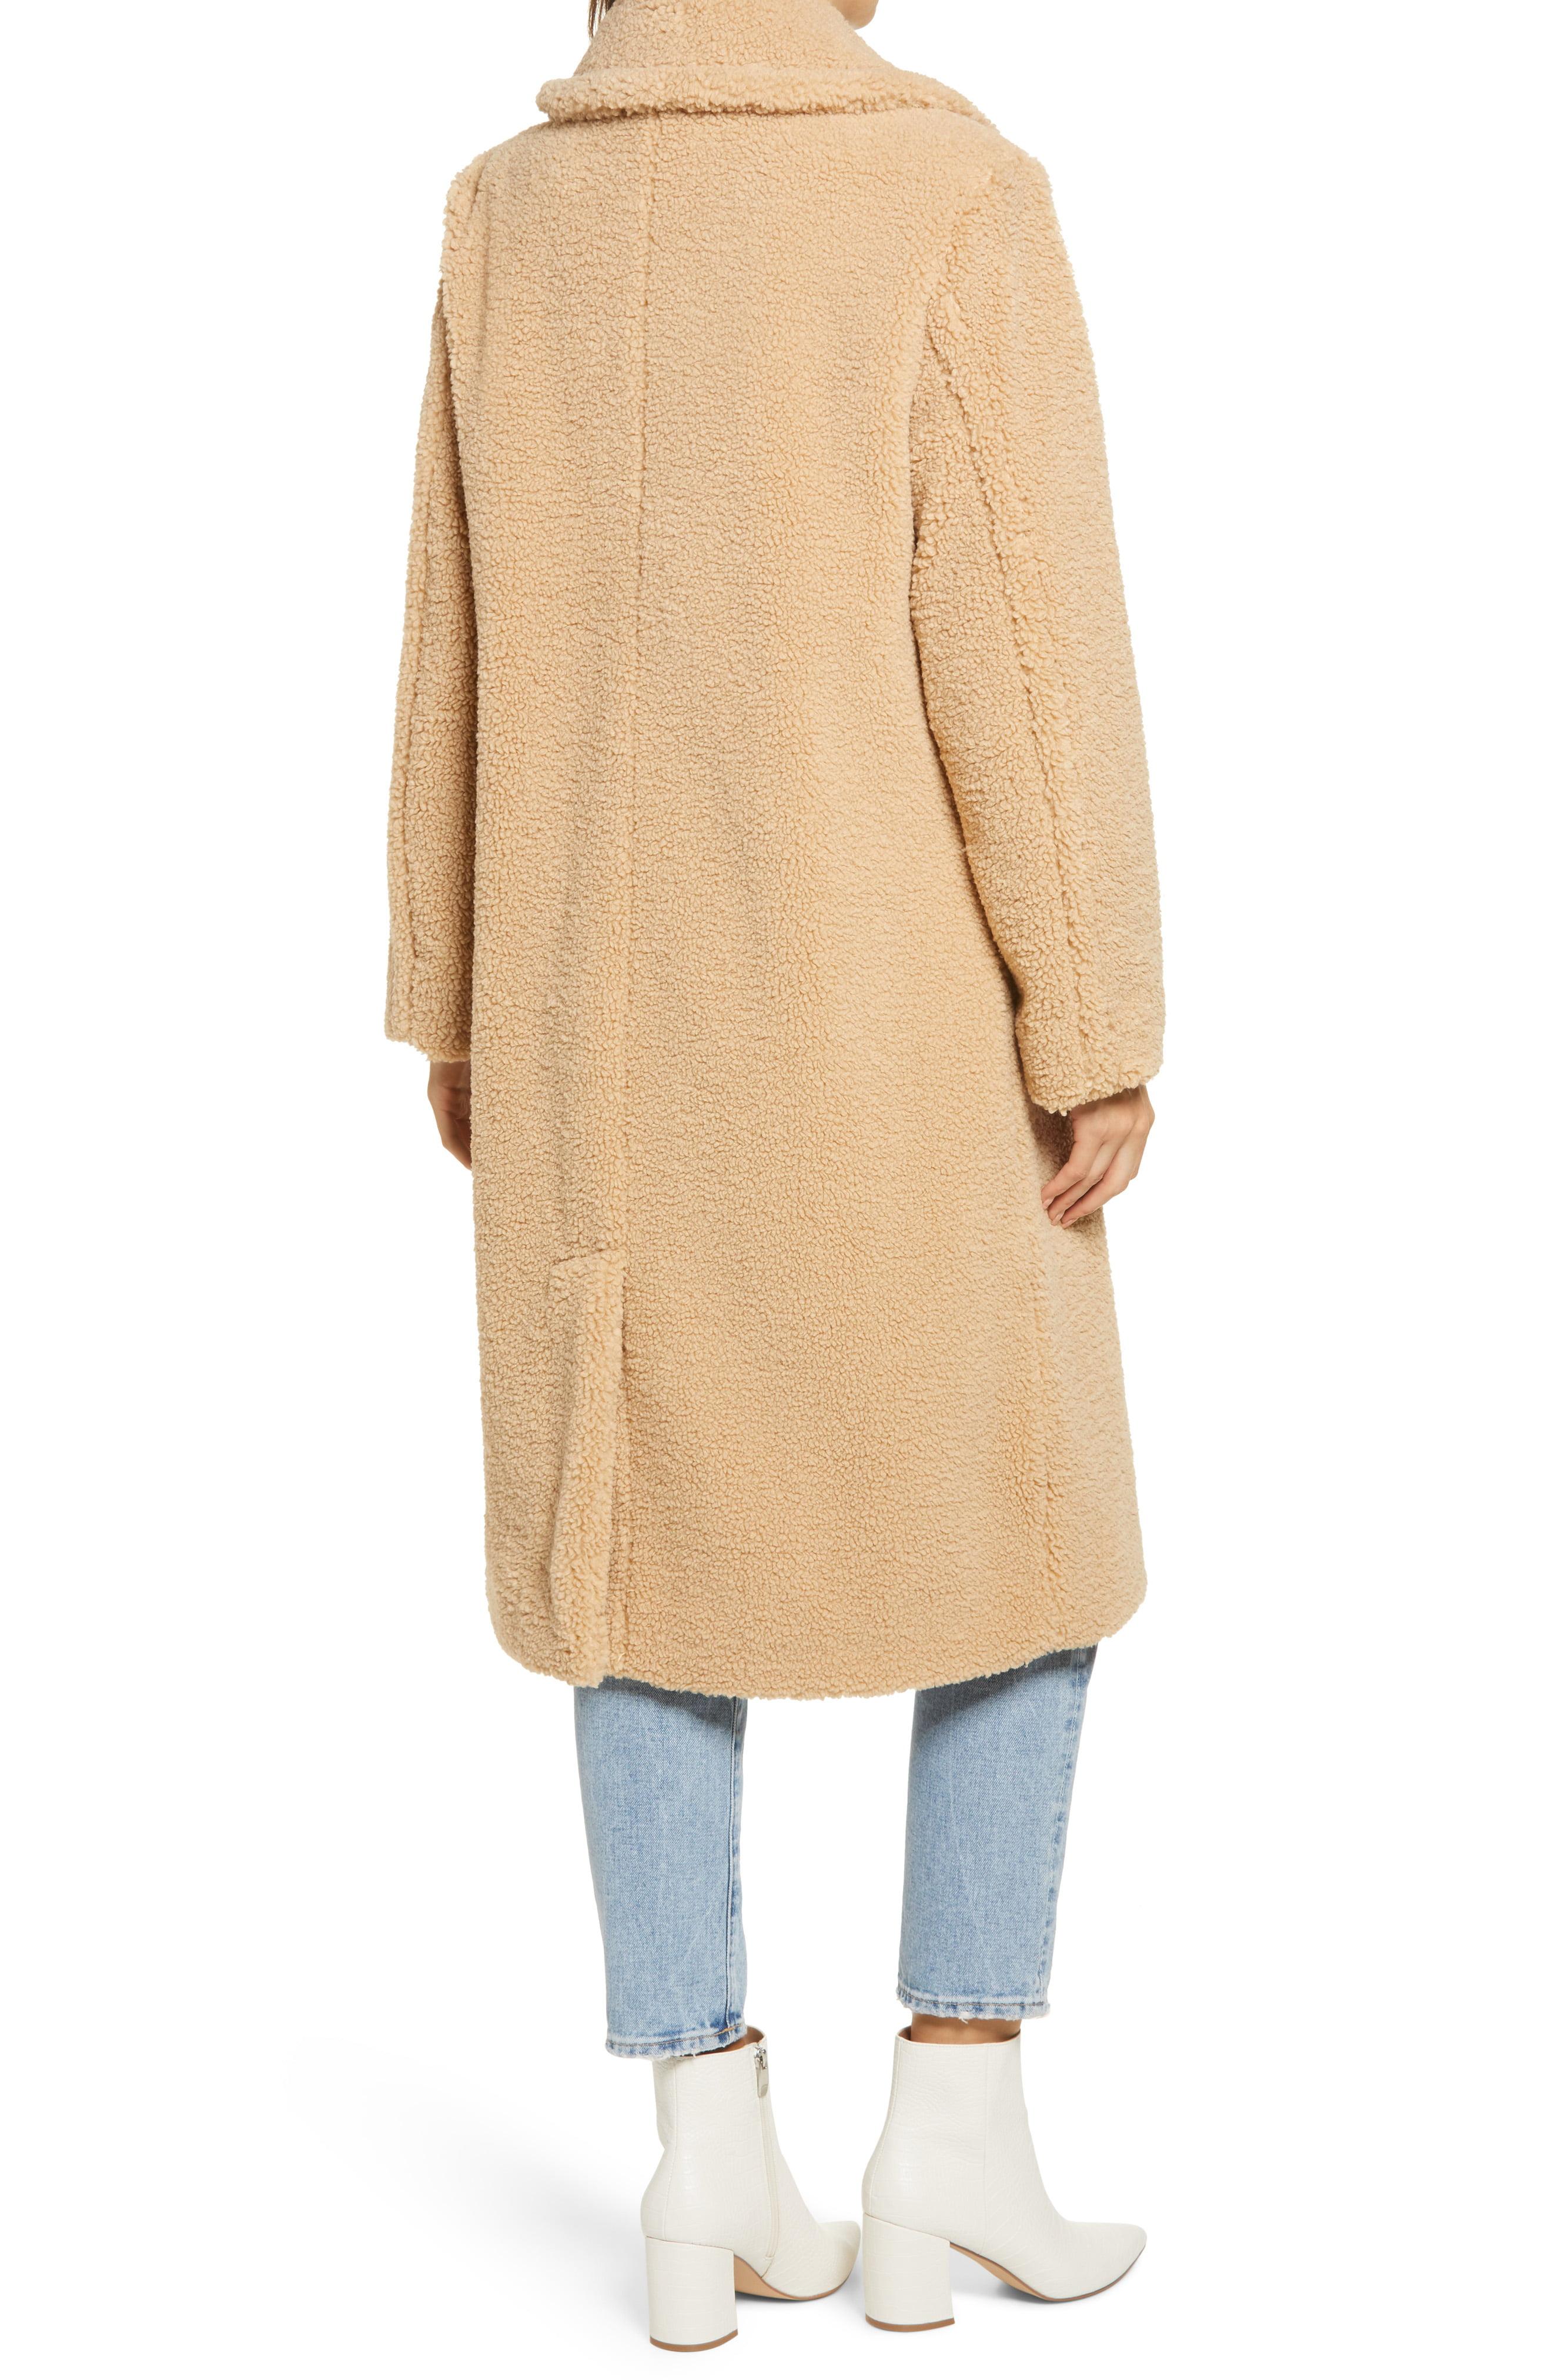 Sanctuary Teddy Bear Faux Shearling Coat in Camel (Natural) - Lyst